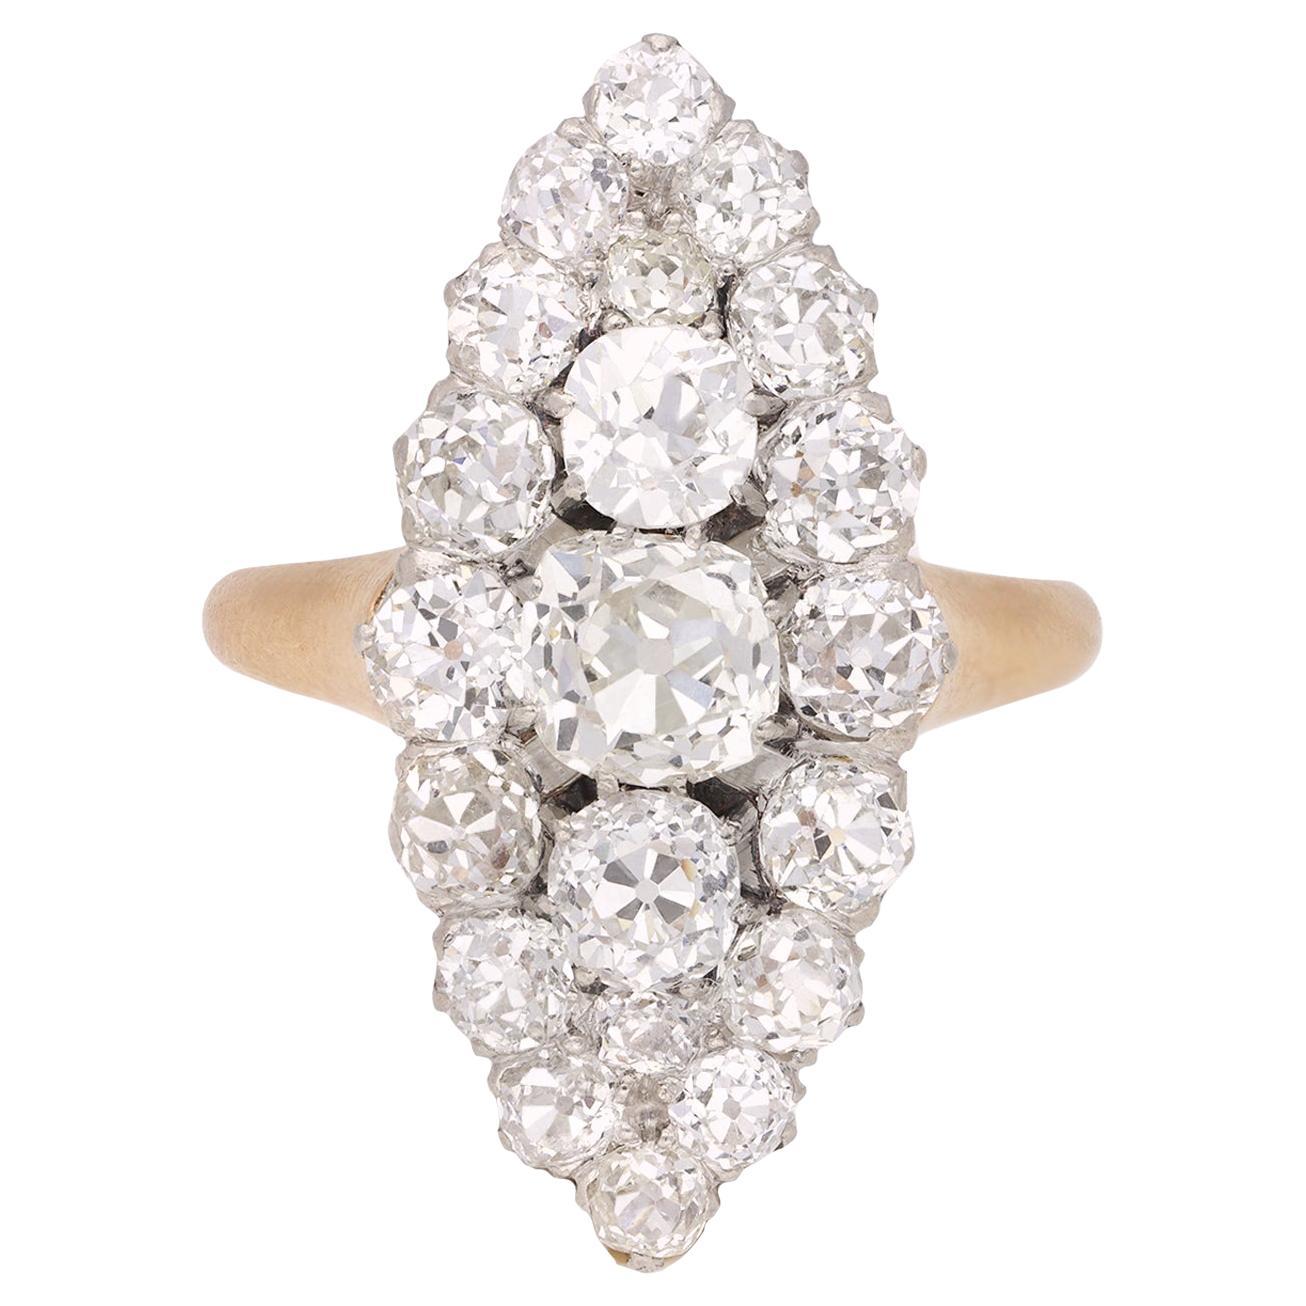 Belle Époque marquise shape diamond cluster ring, French, circa 1905.